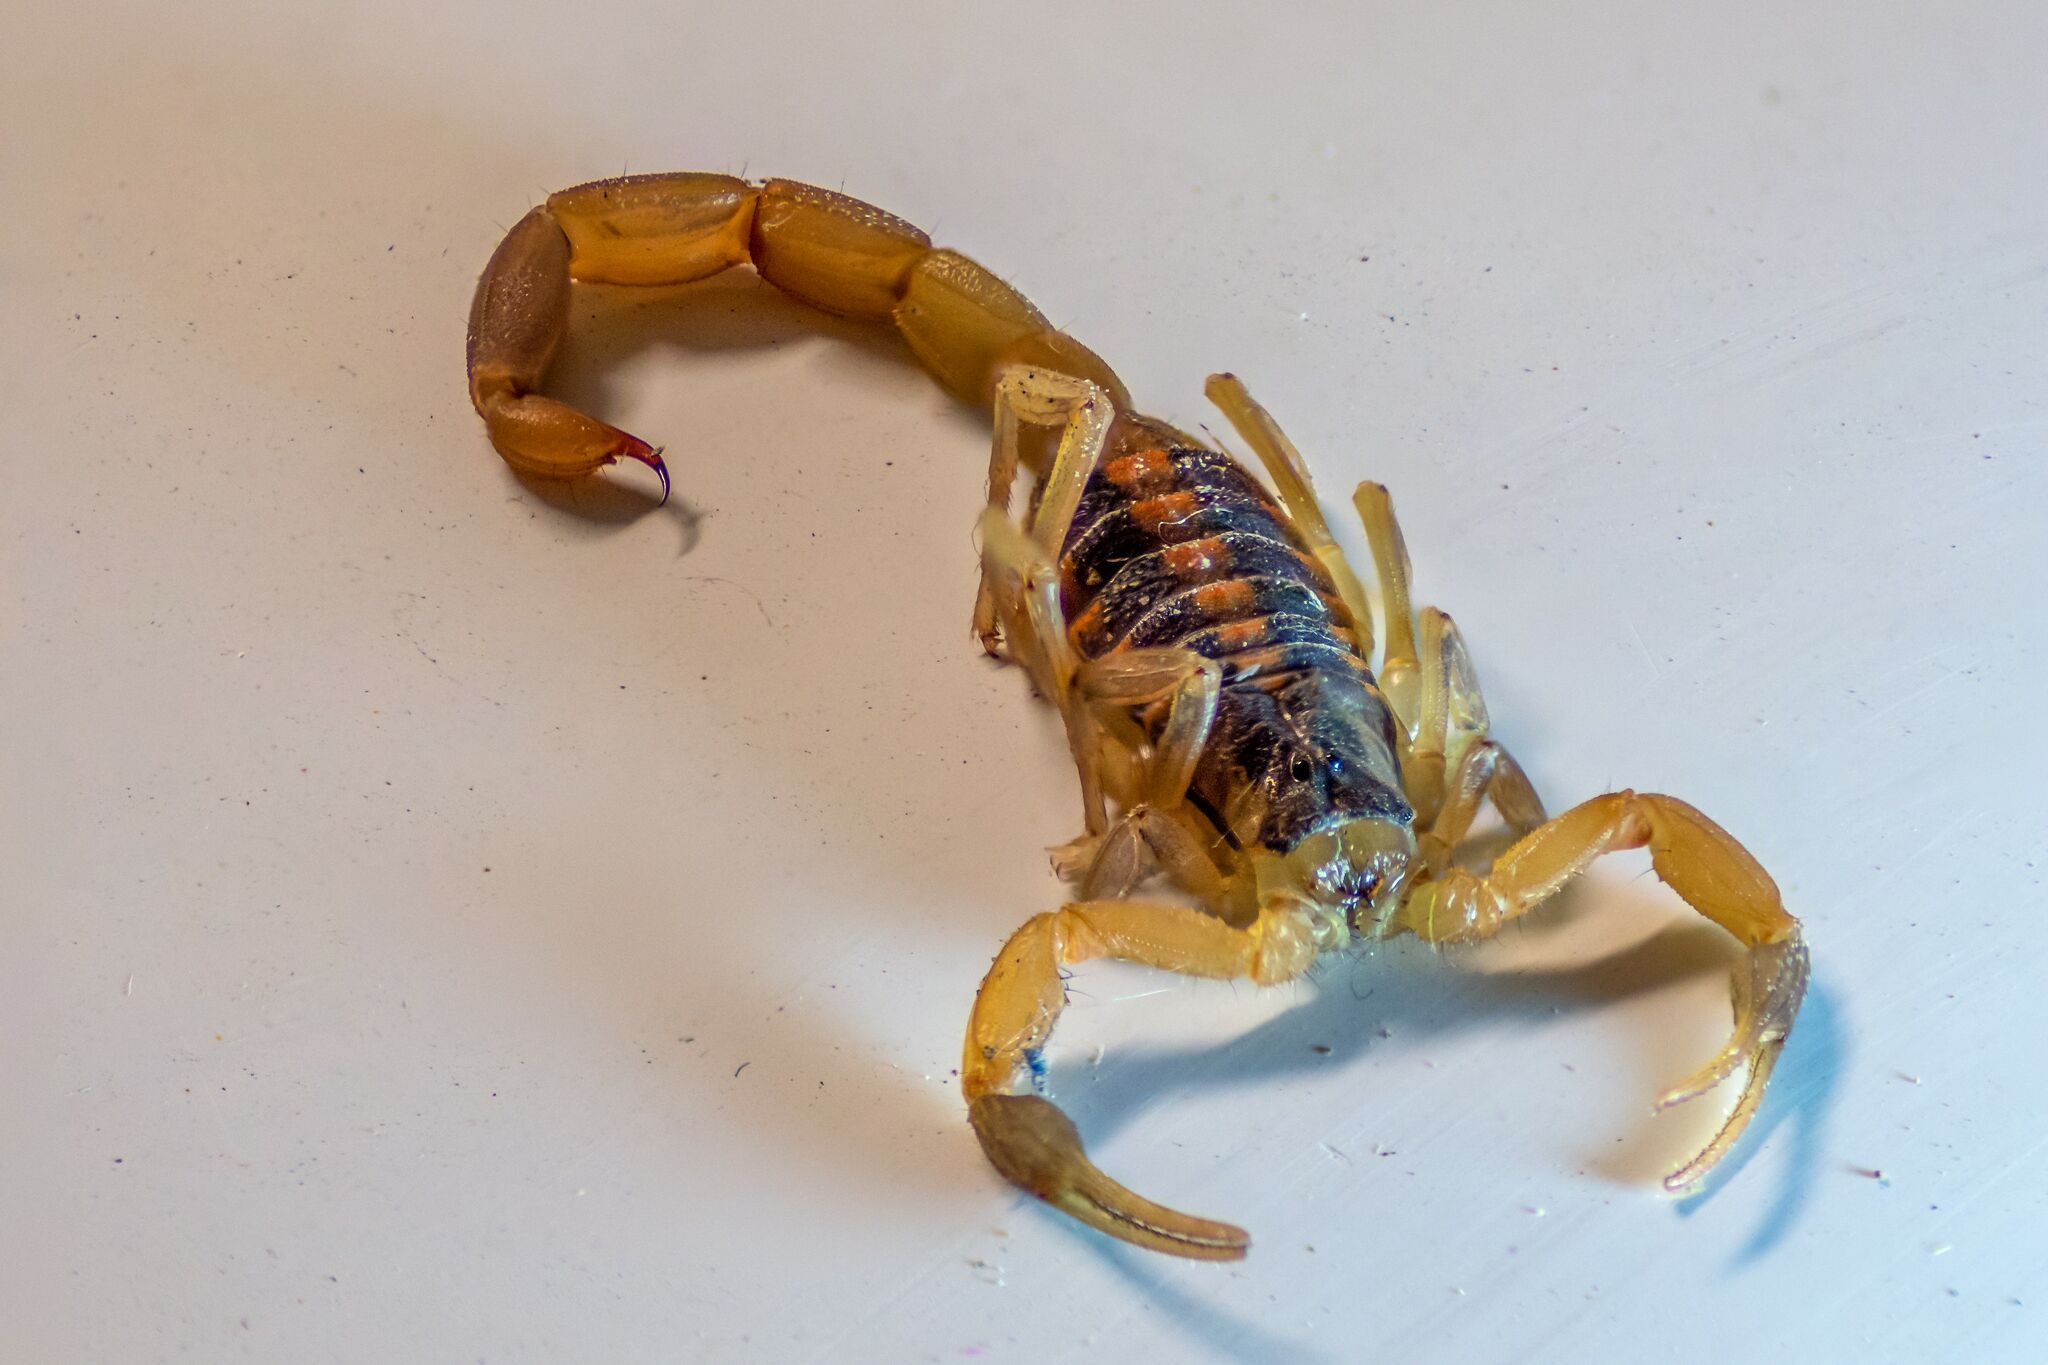 Hot, Dry Summer Has Scorpions In Texas Heading Indoors - Texas A&M Today